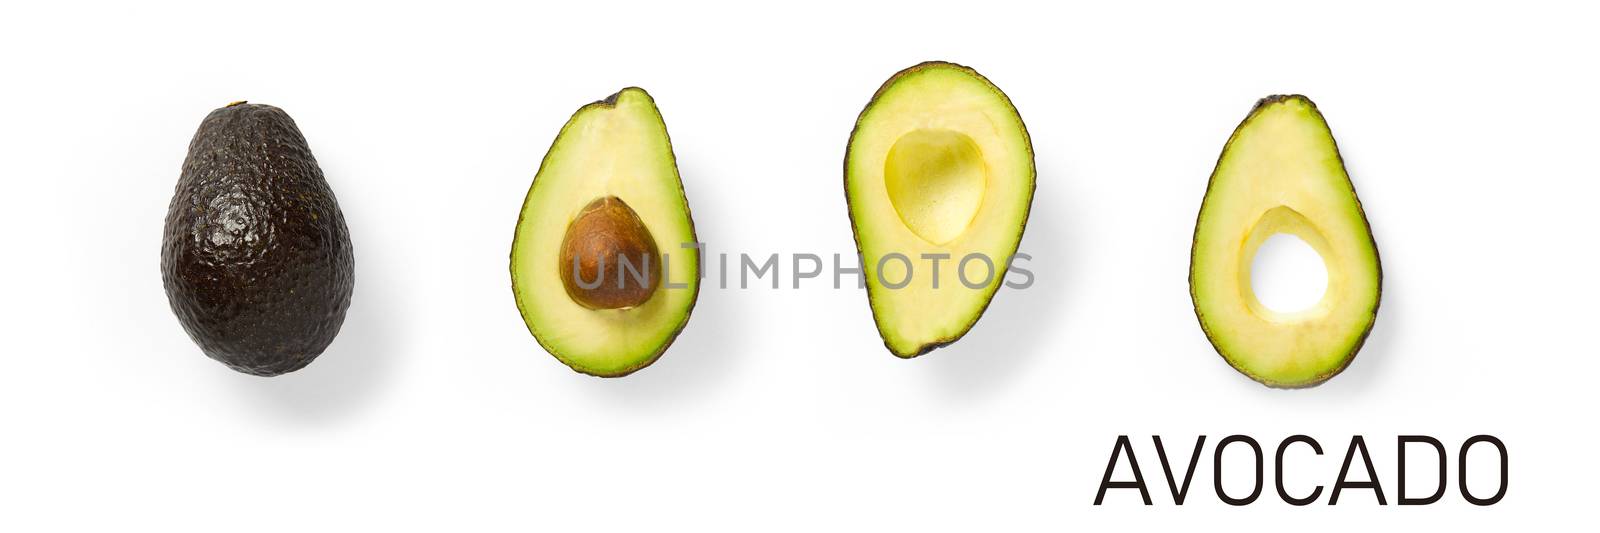 Modern creative avocado collage with simple text on solid color background. Avocado slices creative layout on White background. Flat lay, Design elements, Food concept